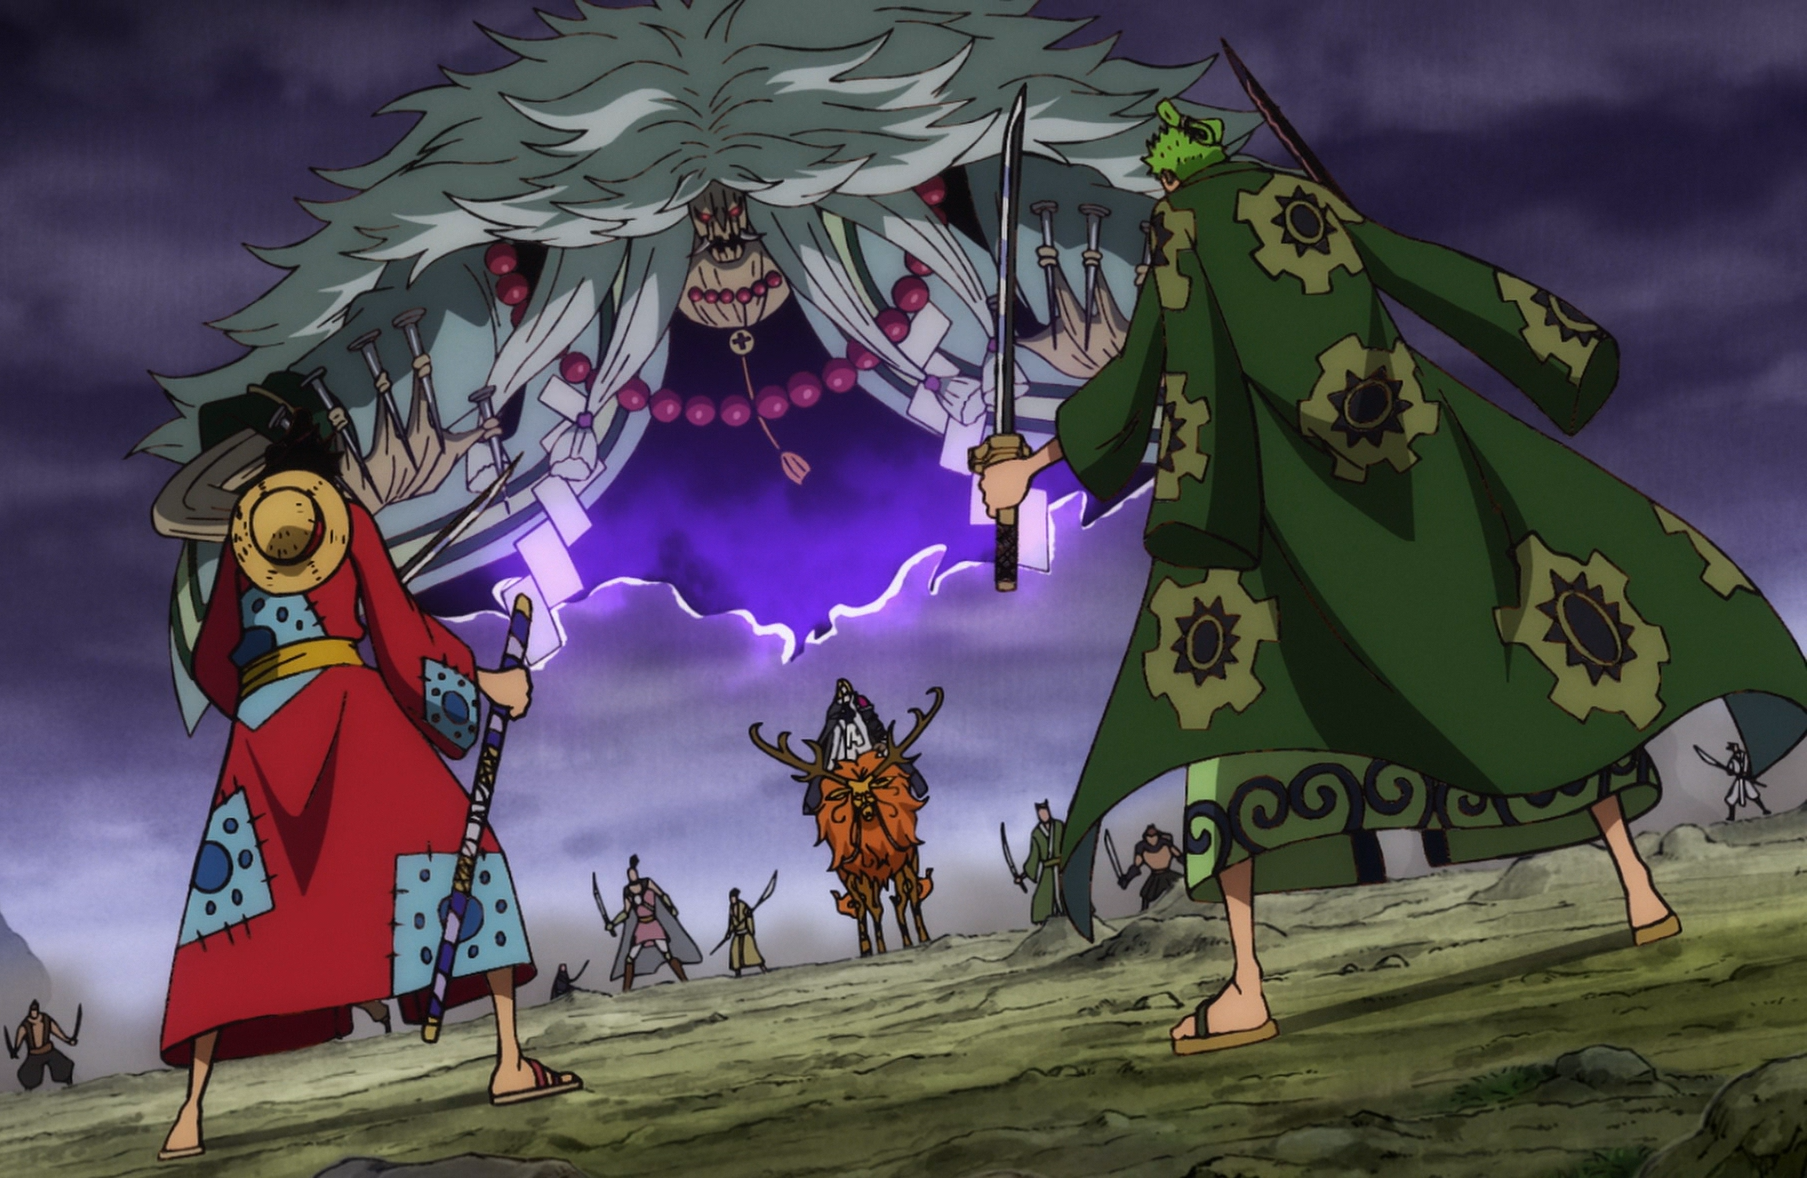 One Piece episode 1038: Luffy is saved and new friends for the